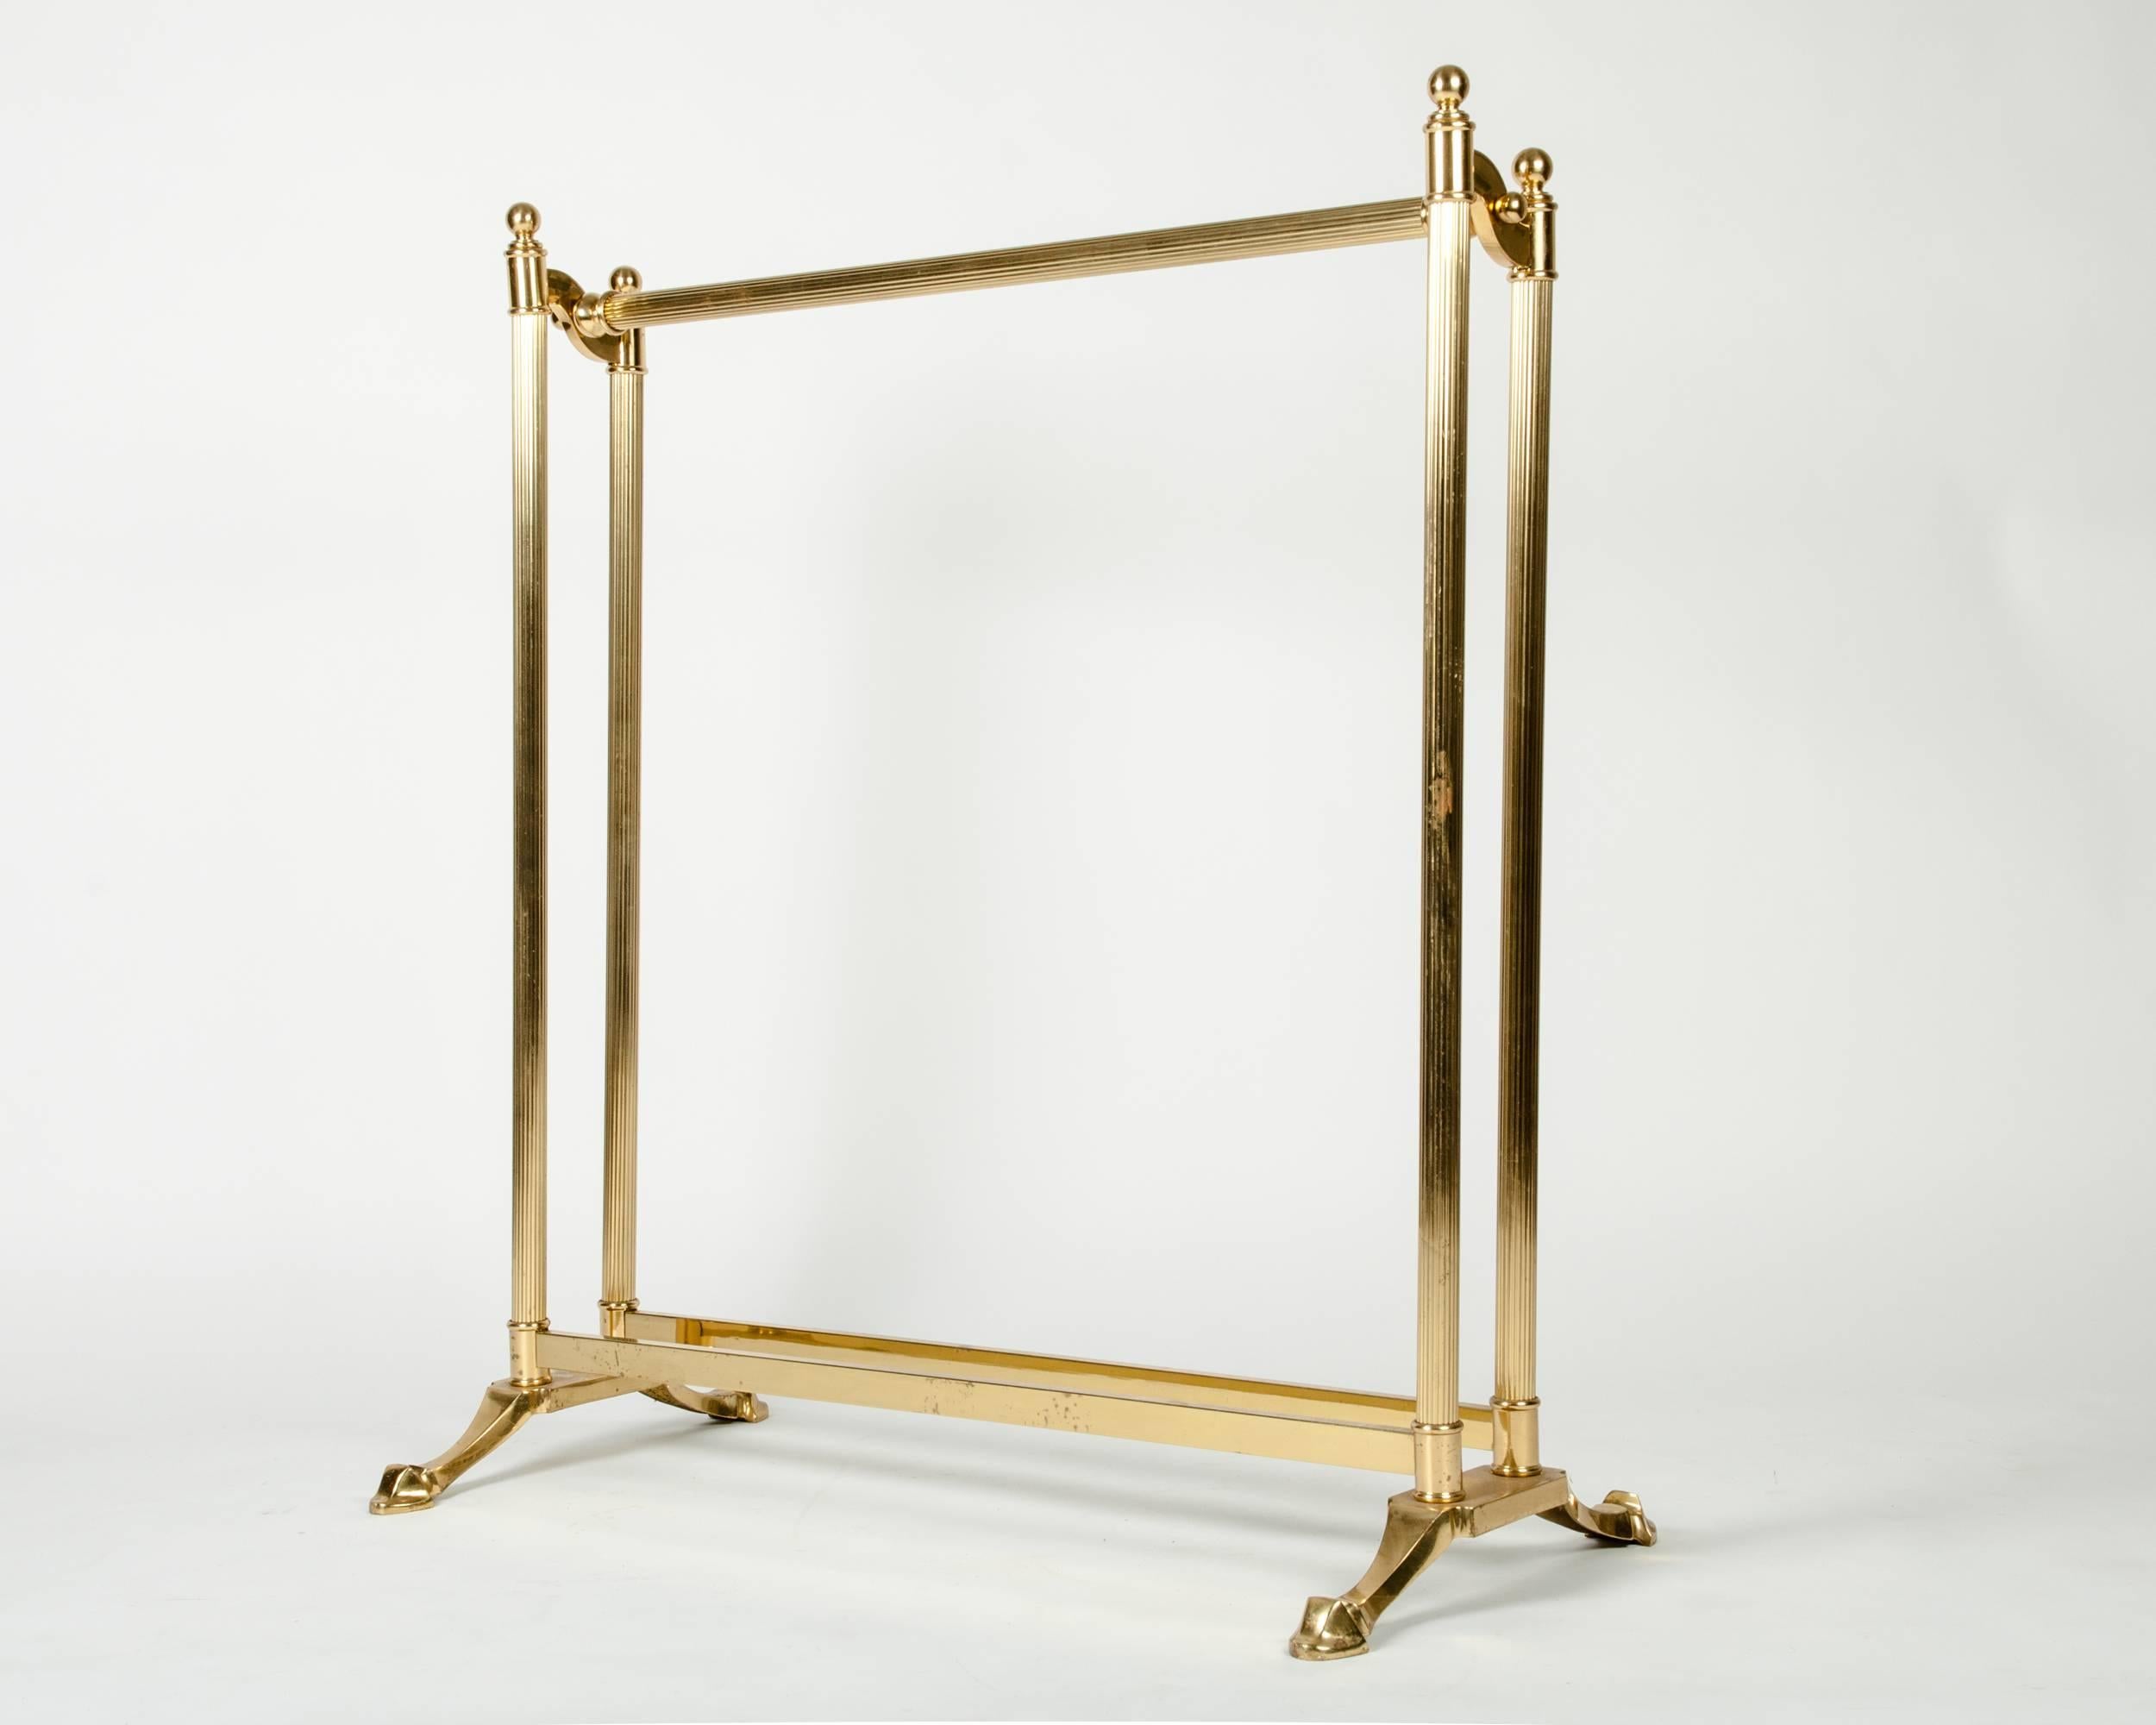 Vintage solid brass bedroom display linen rack. The display rack measure 32 inches high x 30 inches width.